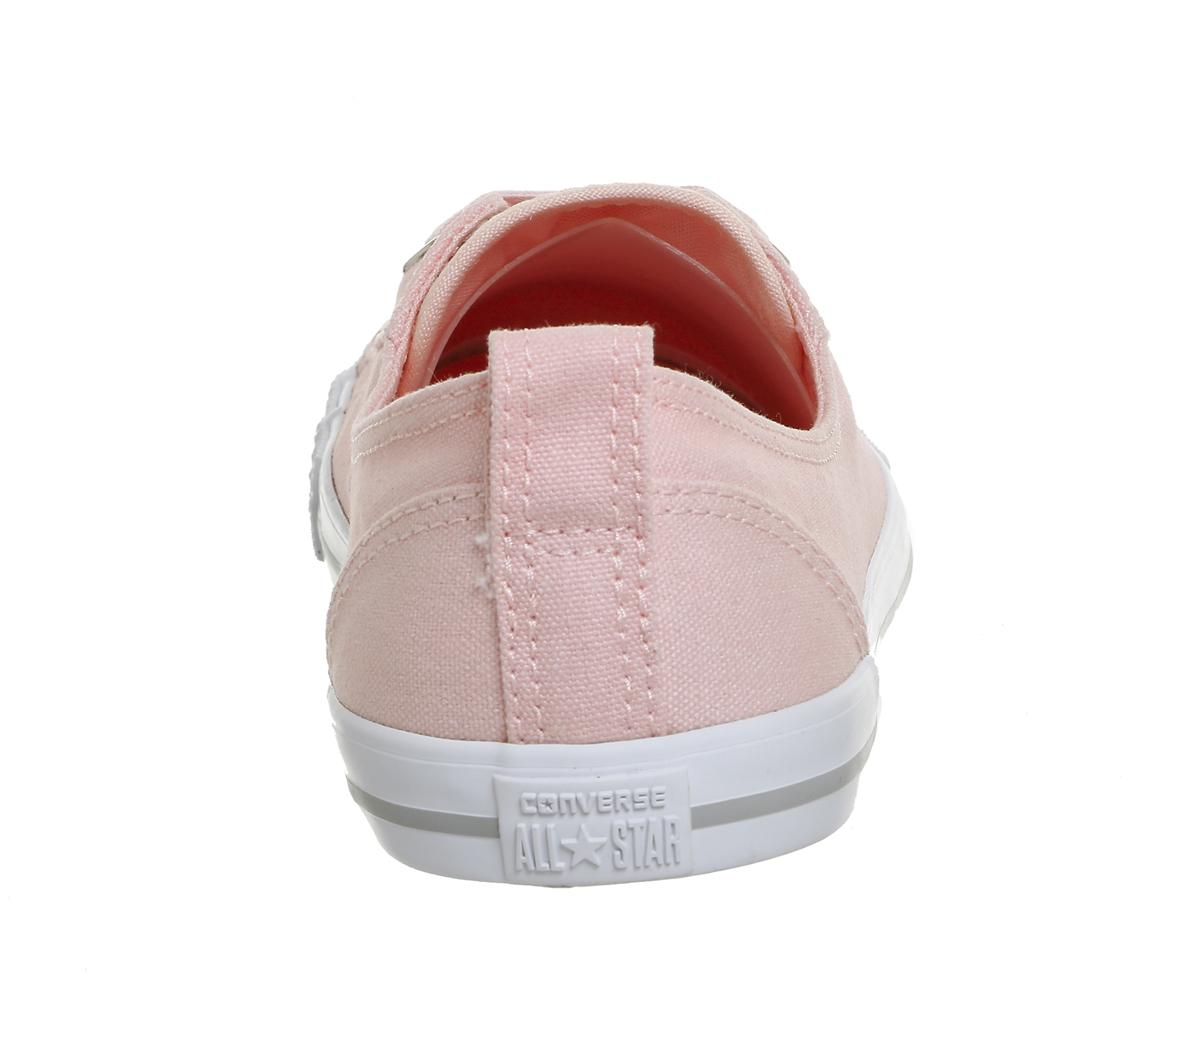 Converse Ctas Ballet Lace Trainers in Pink - Lyst